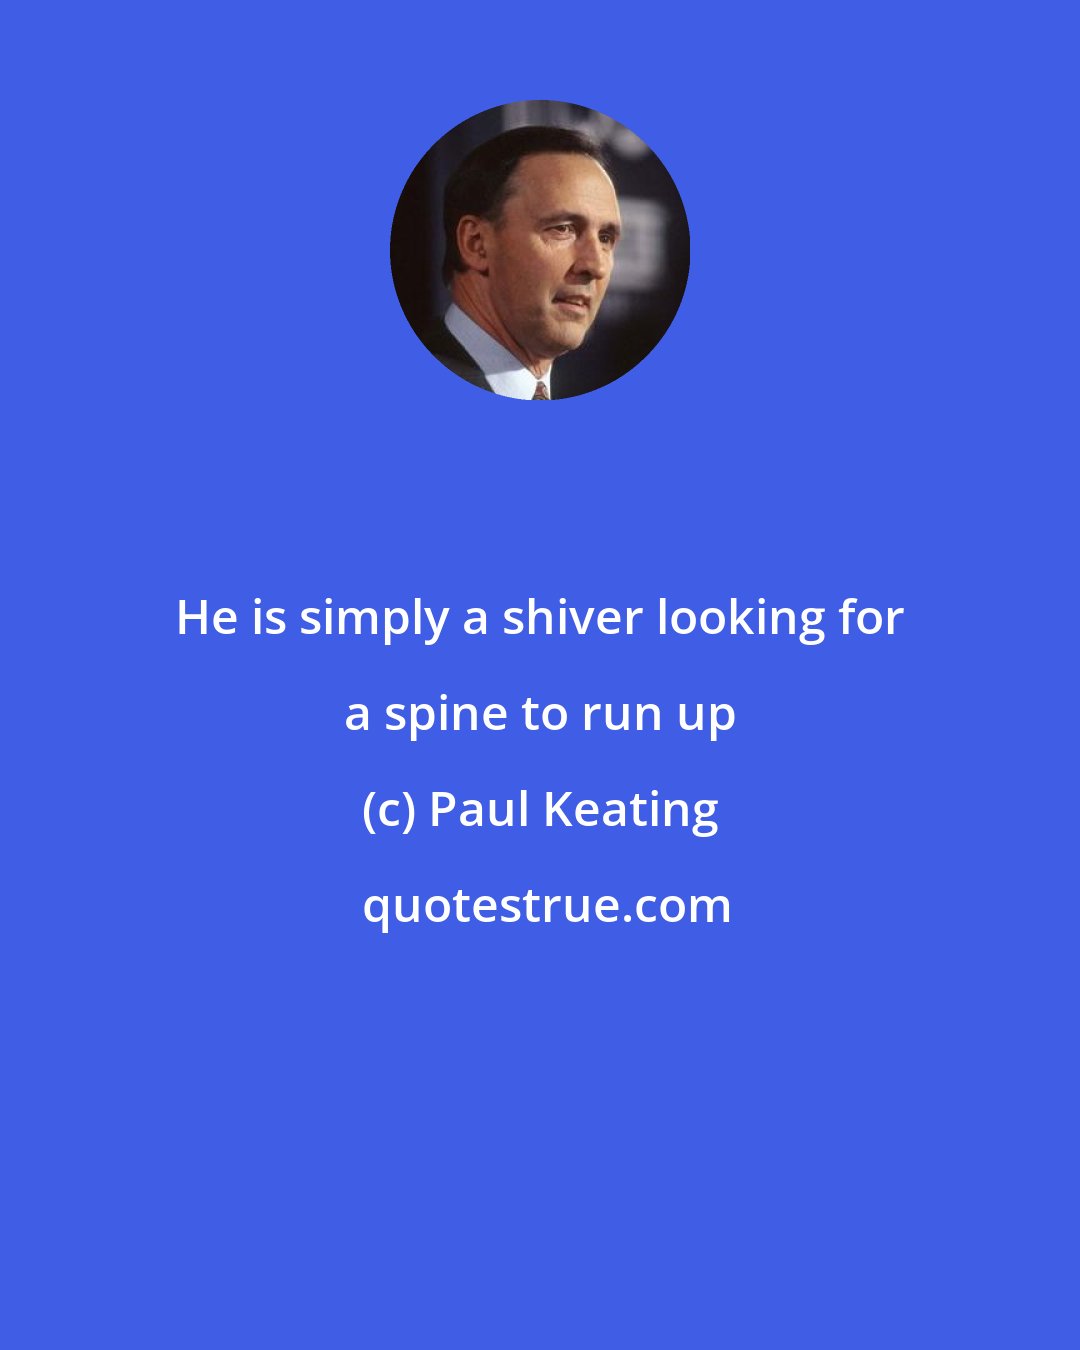 Paul Keating: He is simply a shiver looking for a spine to run up